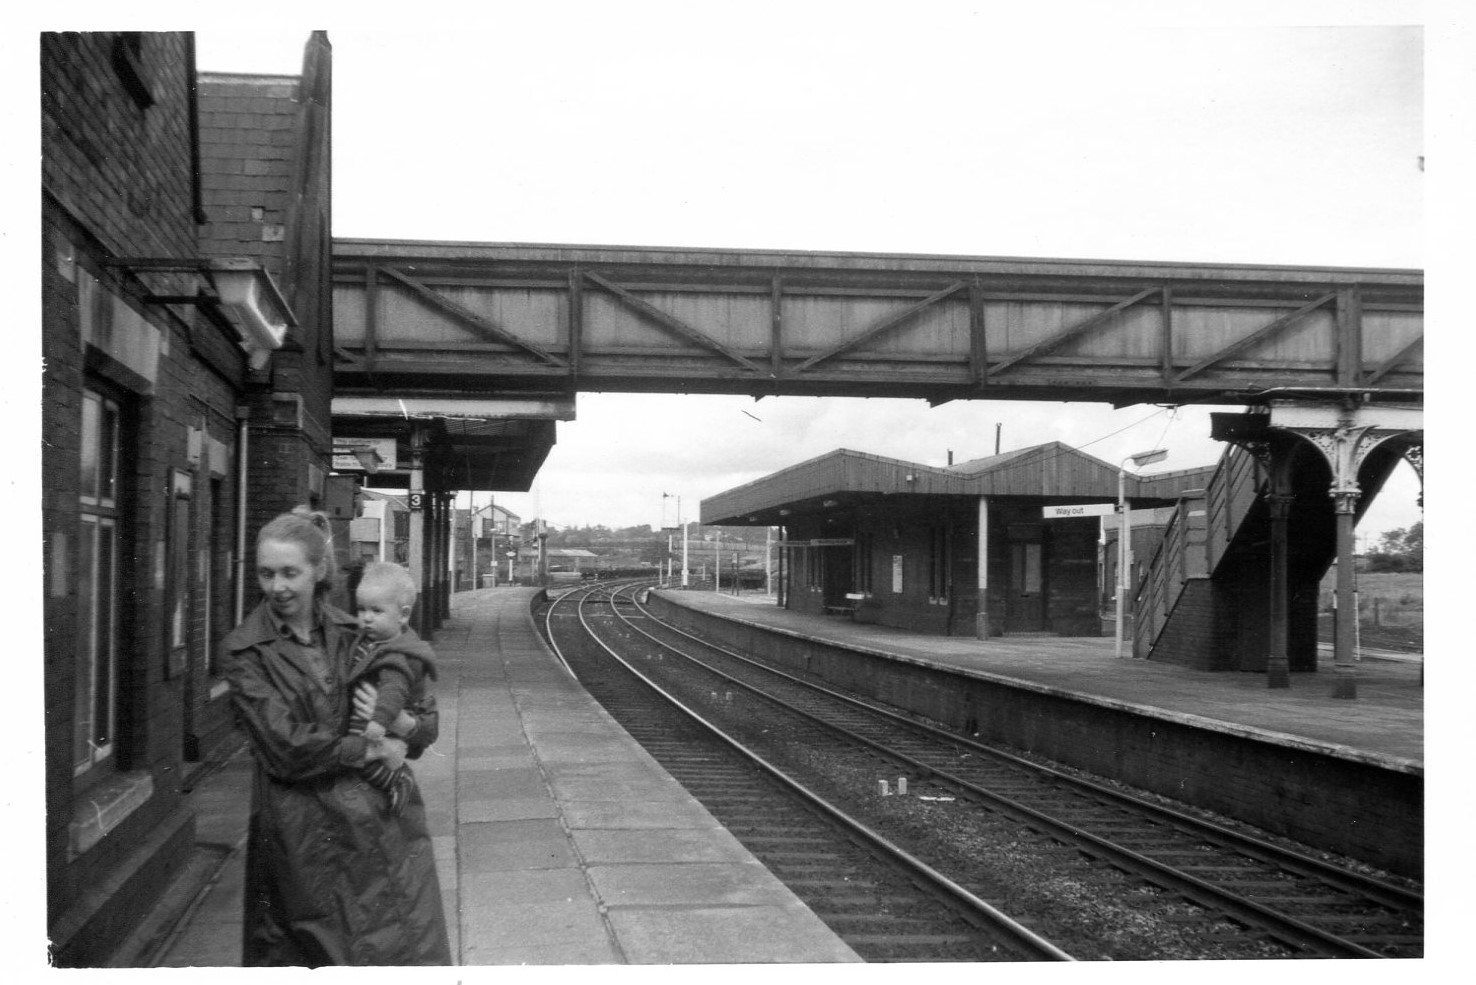 Whitchurch Railway Station